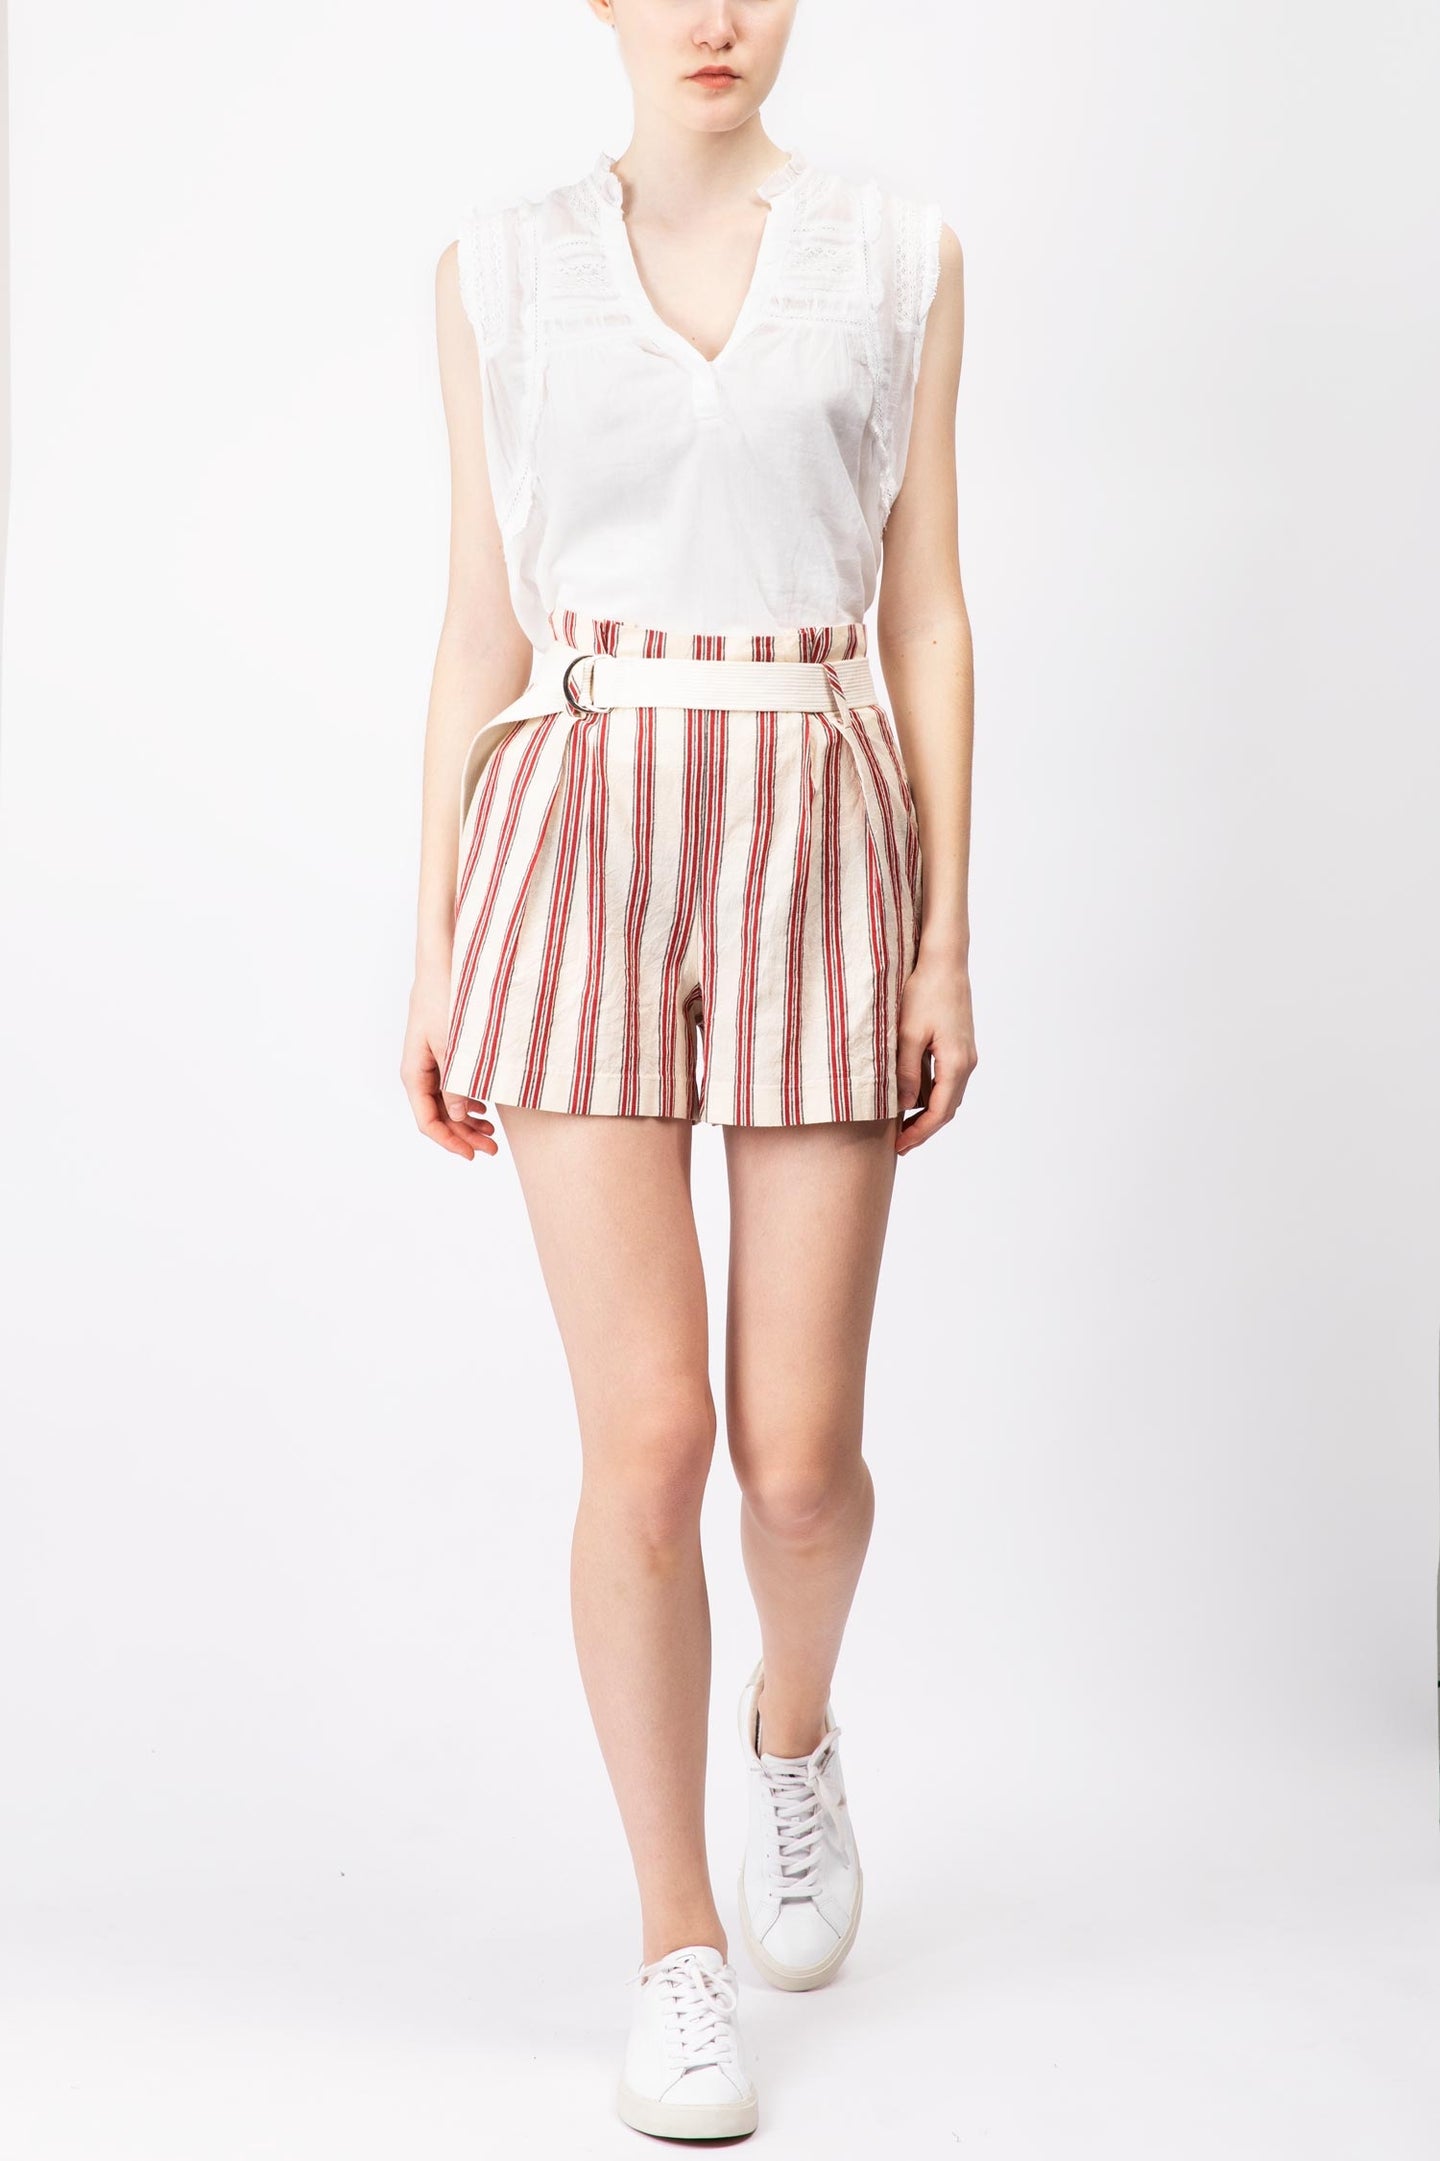 Berenice skirts, sweaters and clothings for women online